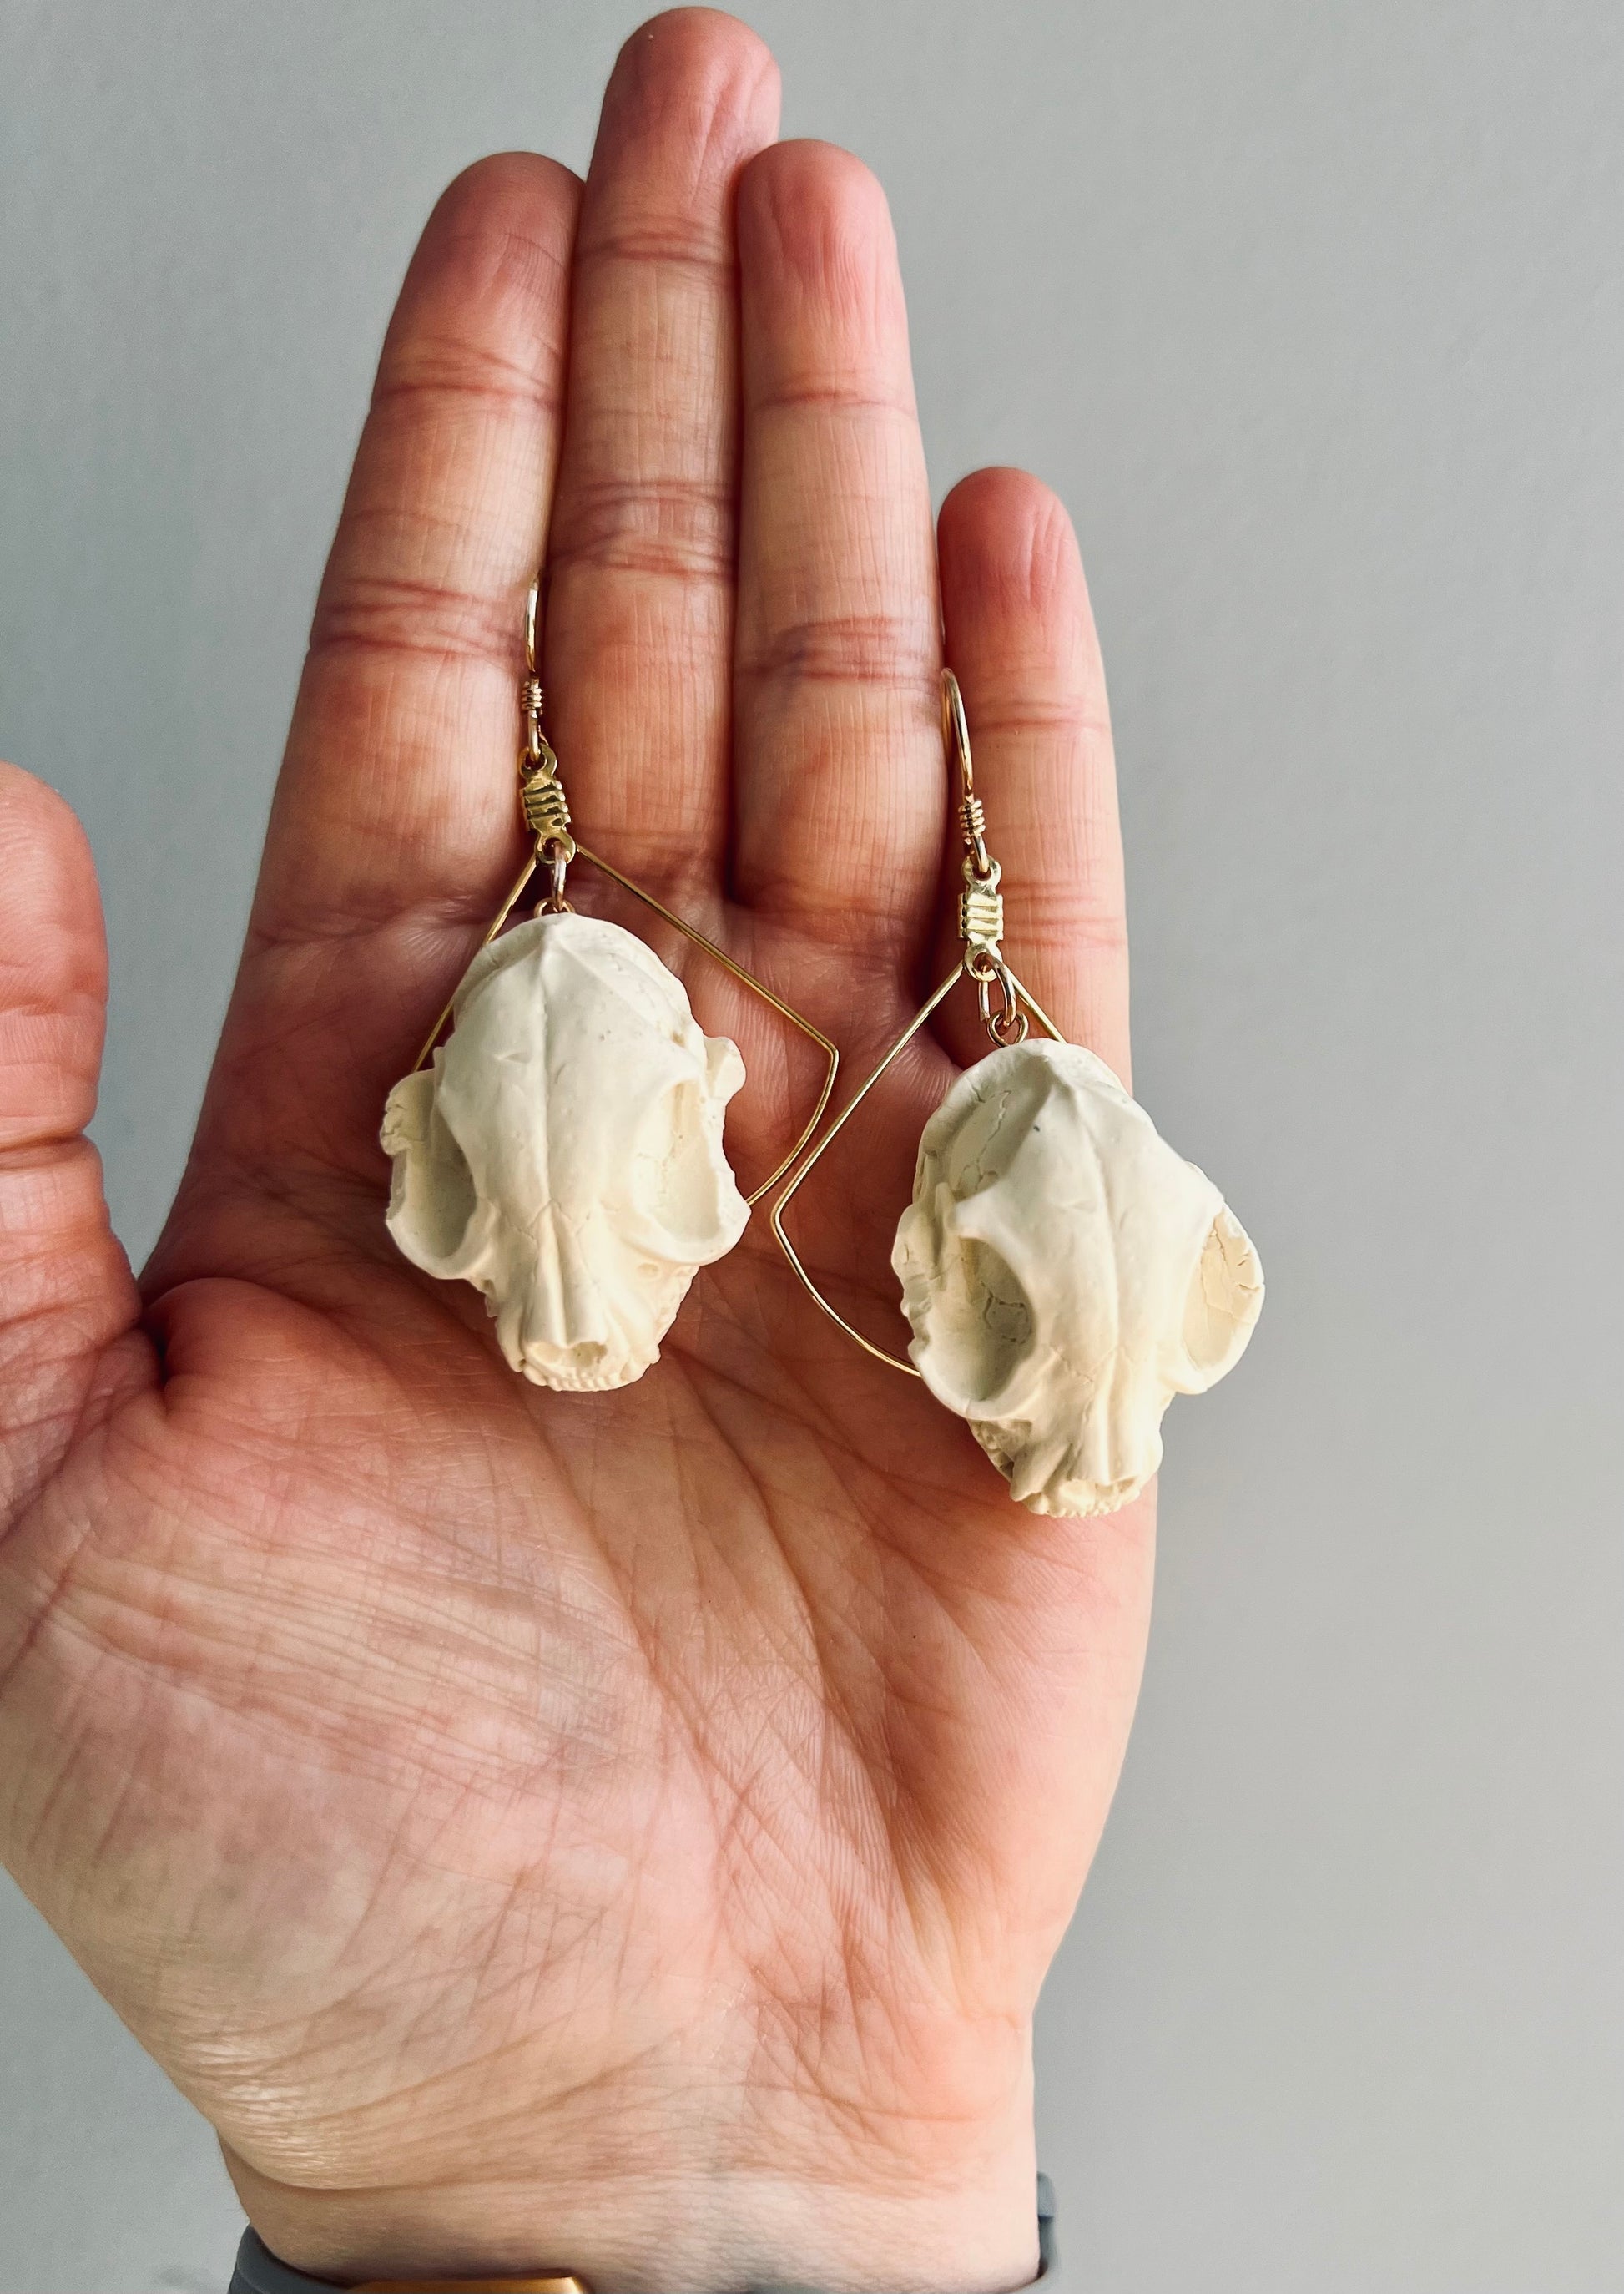 Embrace the enchanting allure of witchcraft with our polymer clay earrings showcasing a cat skull design. Symbolizing the mystical connection between witches and their feline companions, these earrings add a touch of magic to any outfit. Make a statement with these bewitching accessories that capture the essence of witchcraft and mystery.